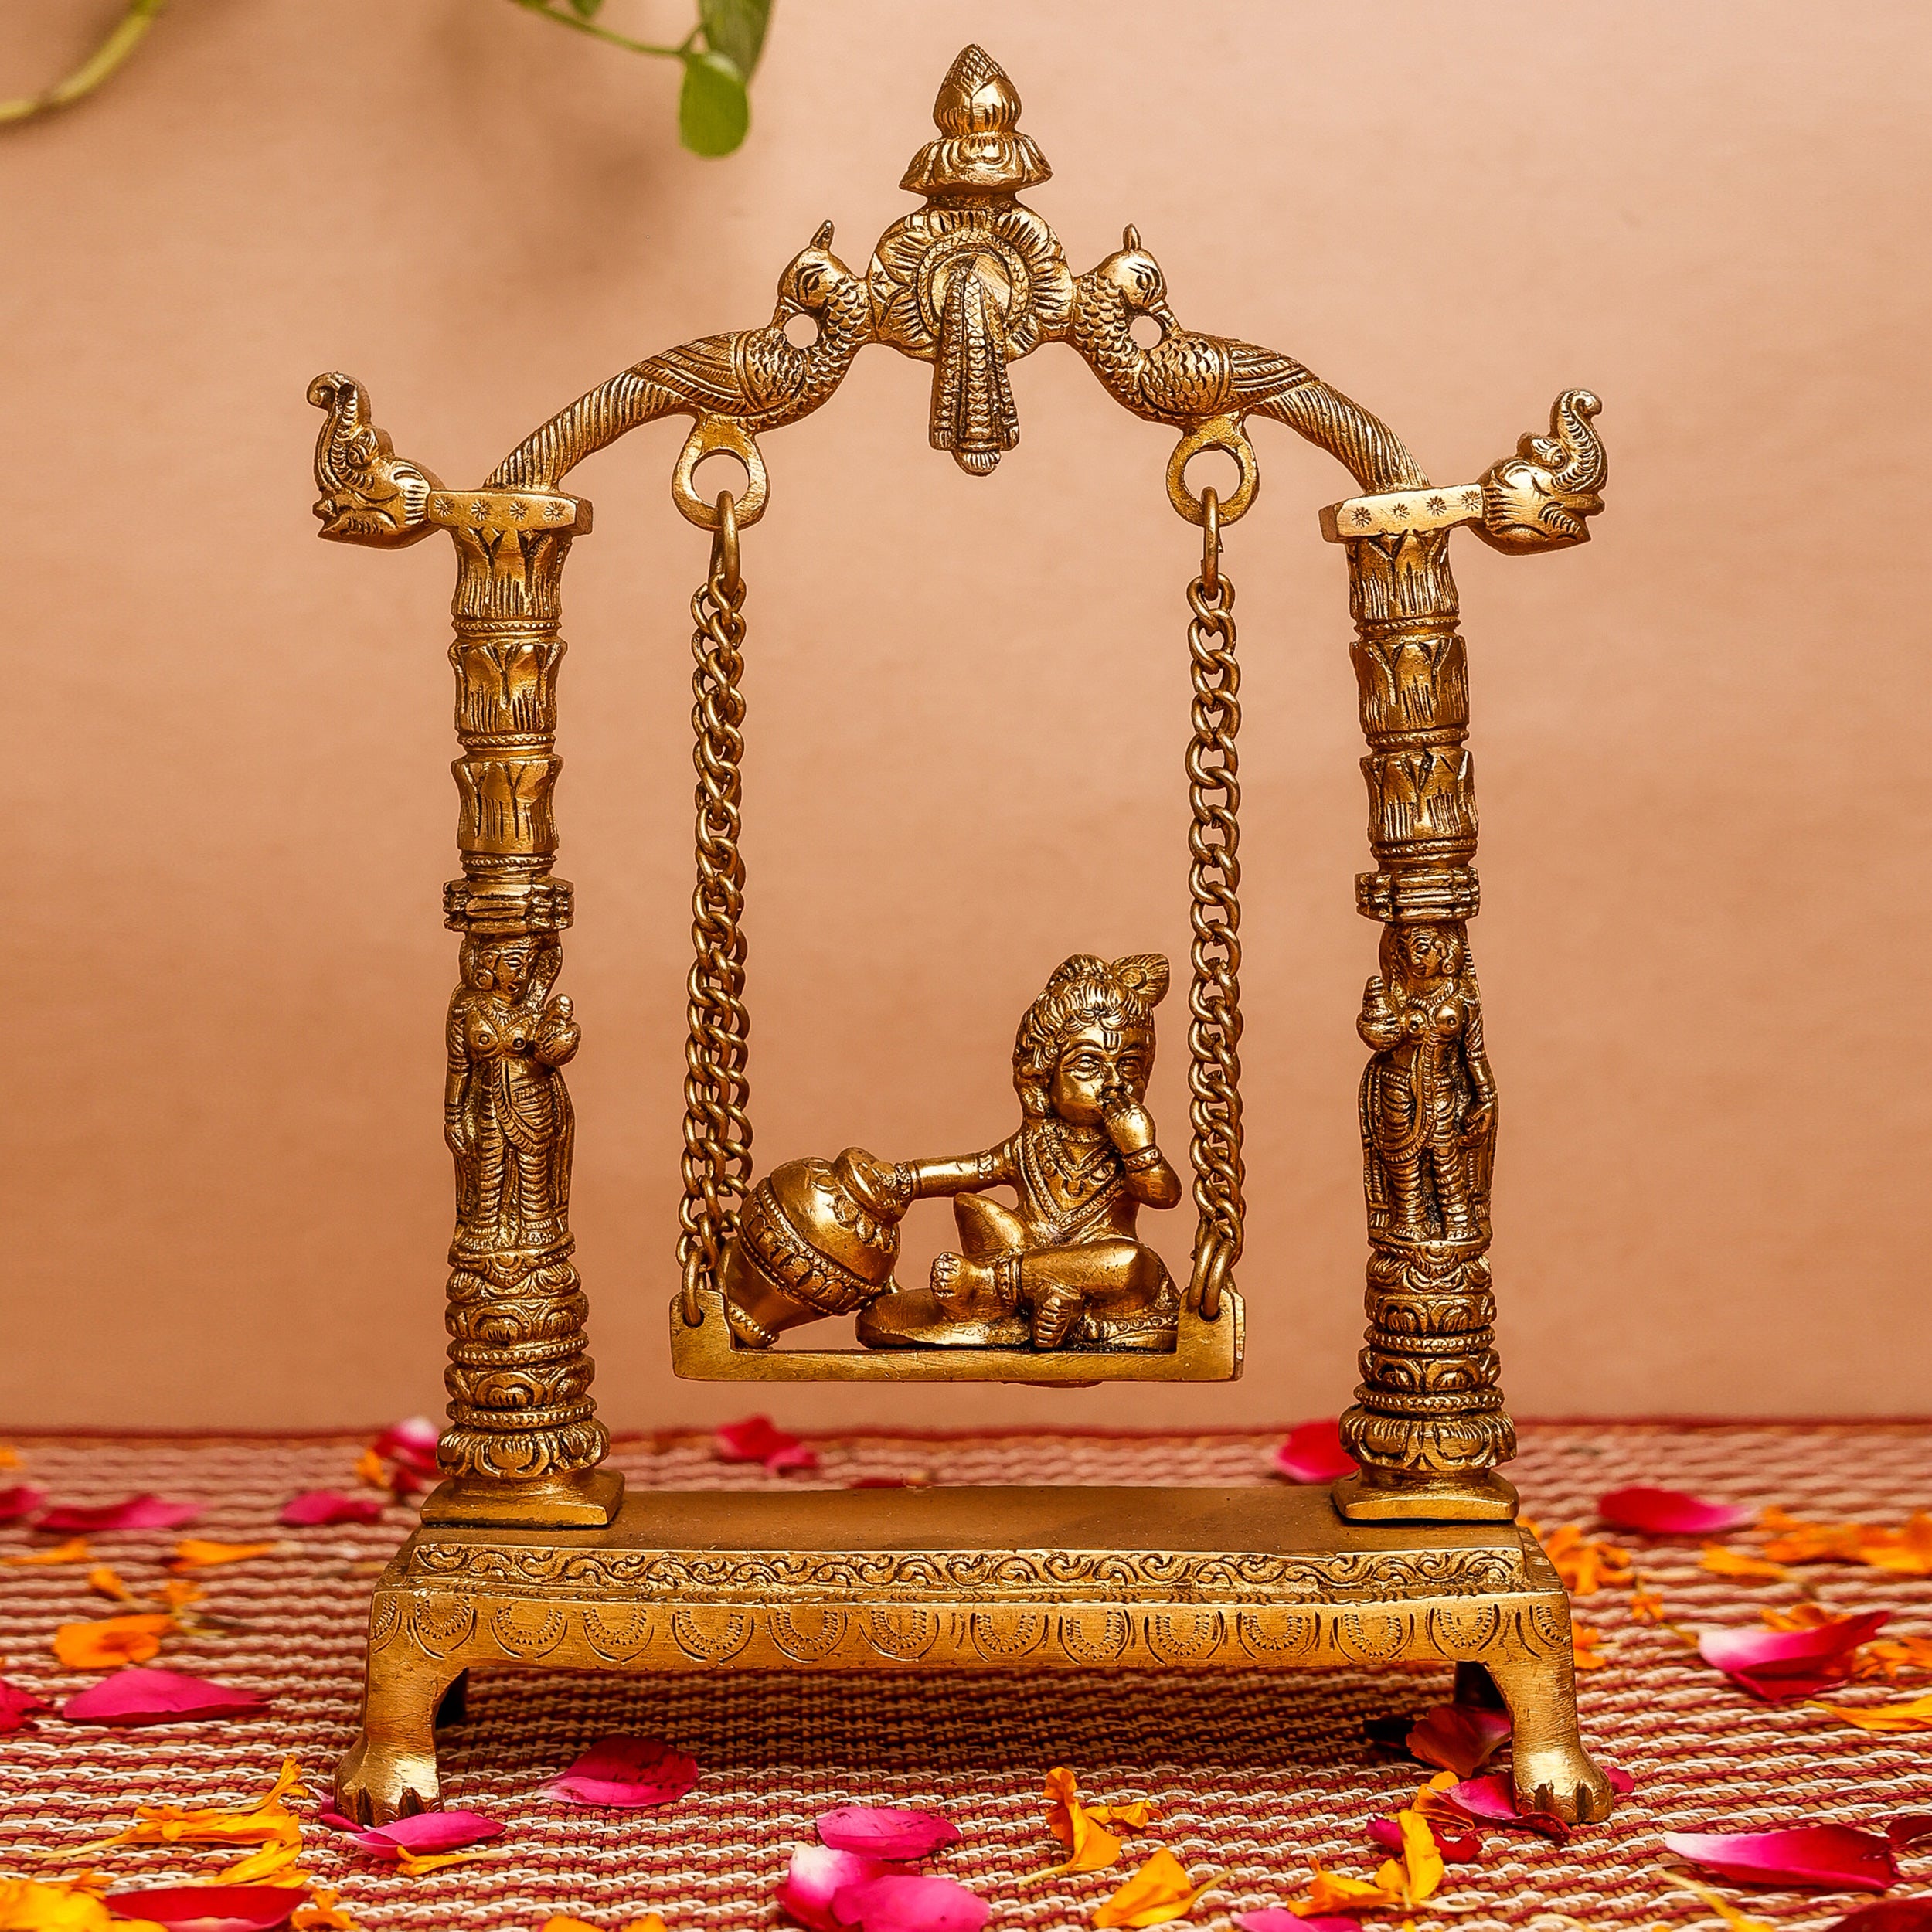 Shop Indian Brass Products & Religious Statues Online USA & Canada